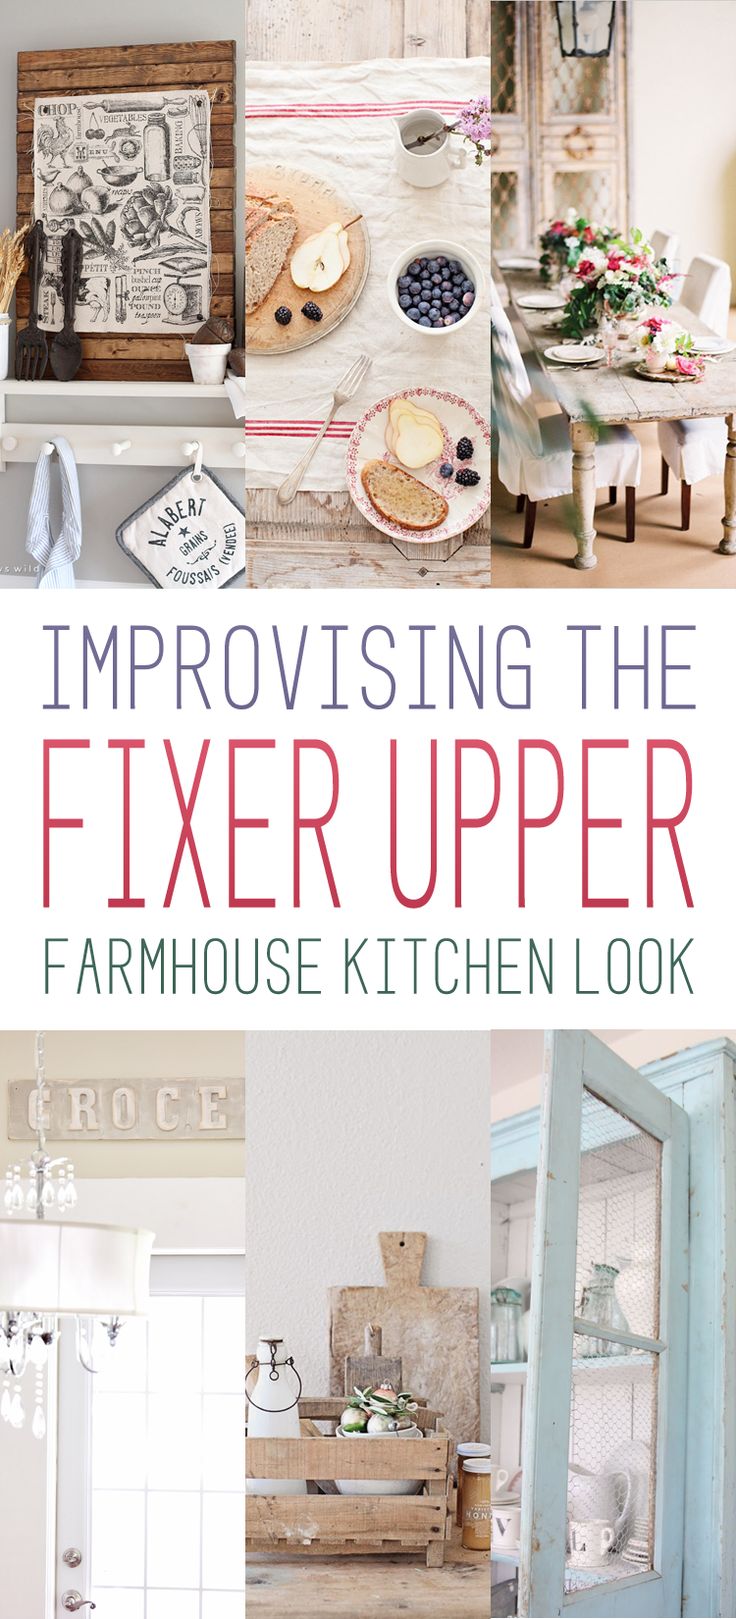 The Fixer Upper Farmhouse Kitchen Look - The Cottage Market